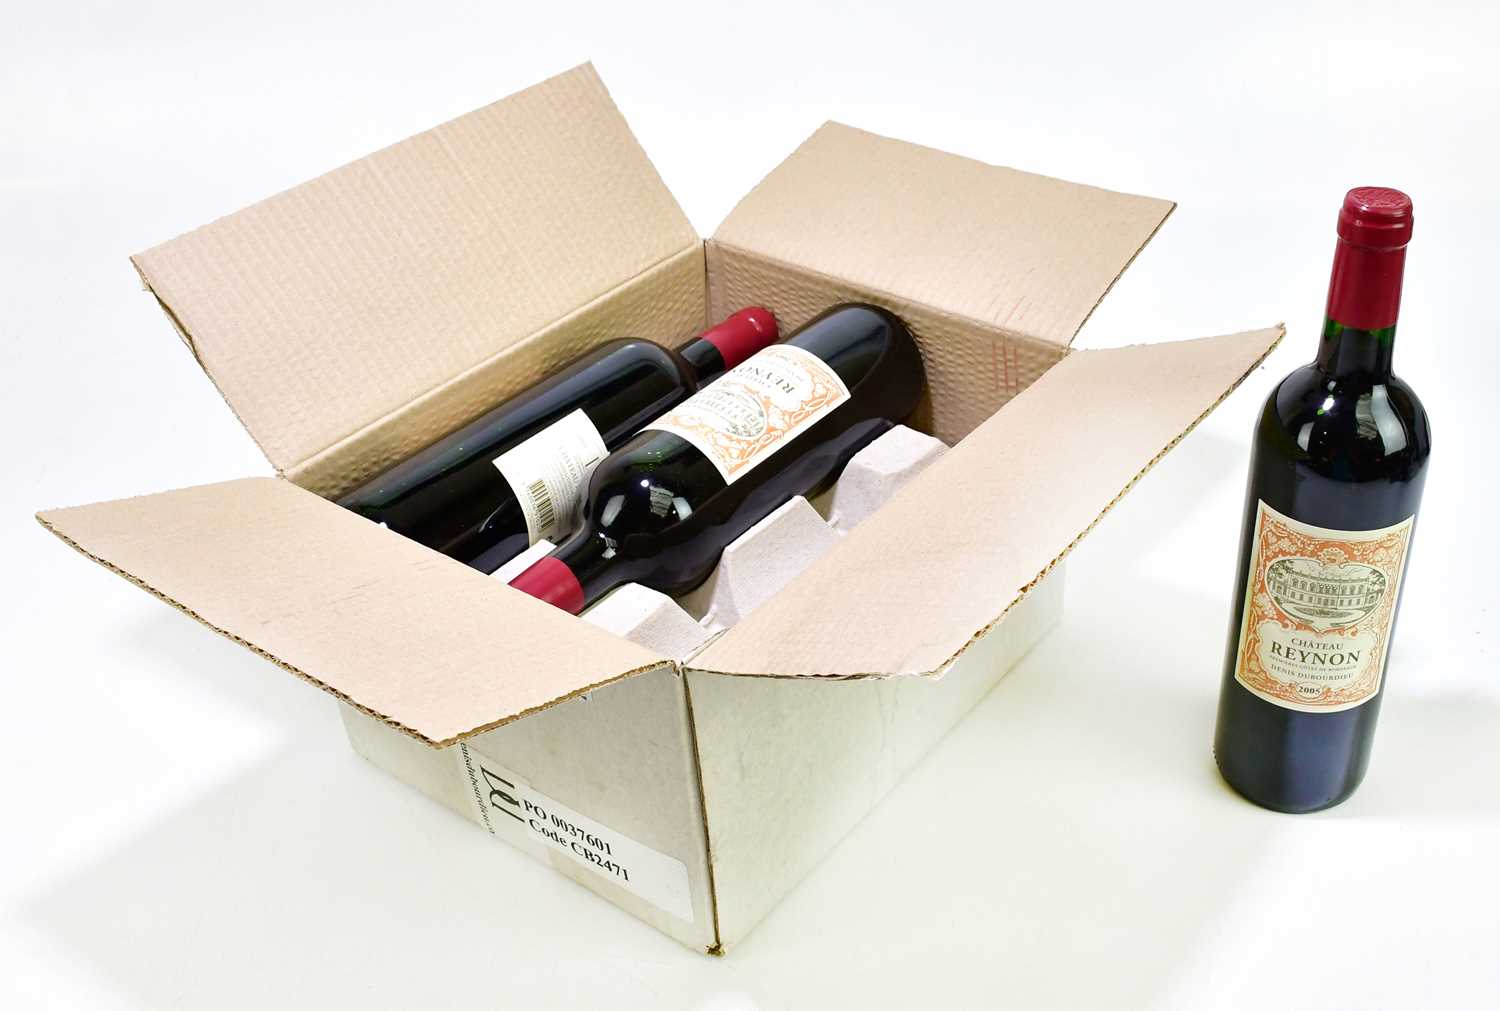 RED WINE; six bottles of Château Reynon Denis Dubourdieu 2005, 13.5%, 750ml, boxed.